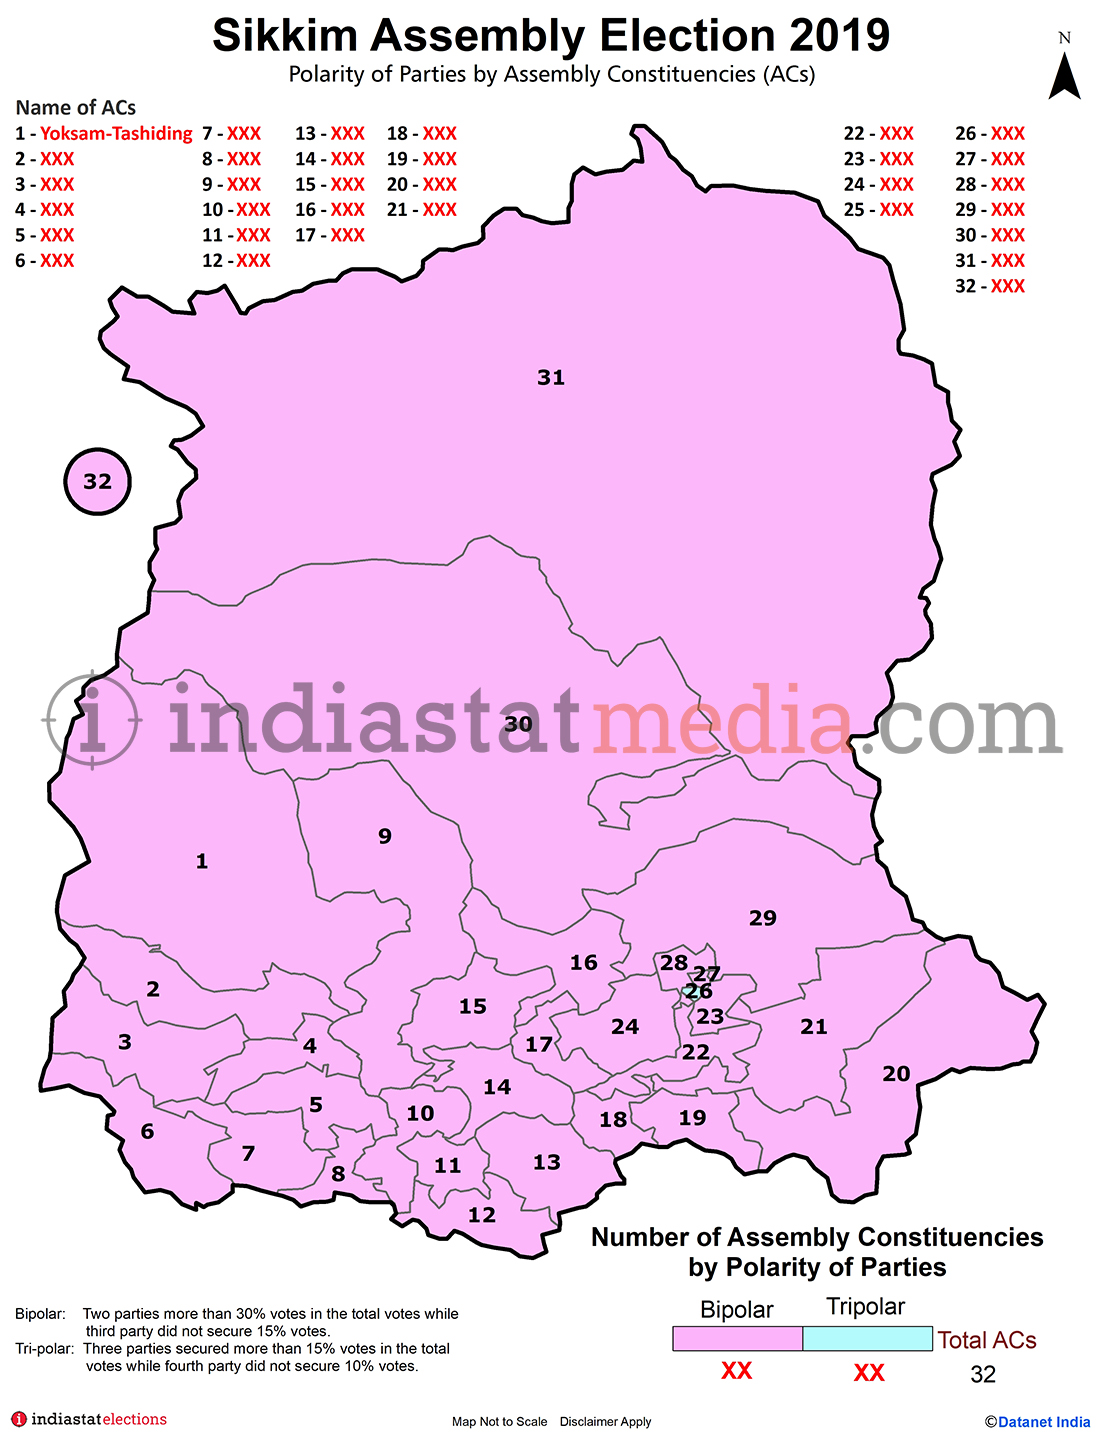 Polarity of Parties by Assembly Constituencies in Sikkim (Assembly Election - 2019)